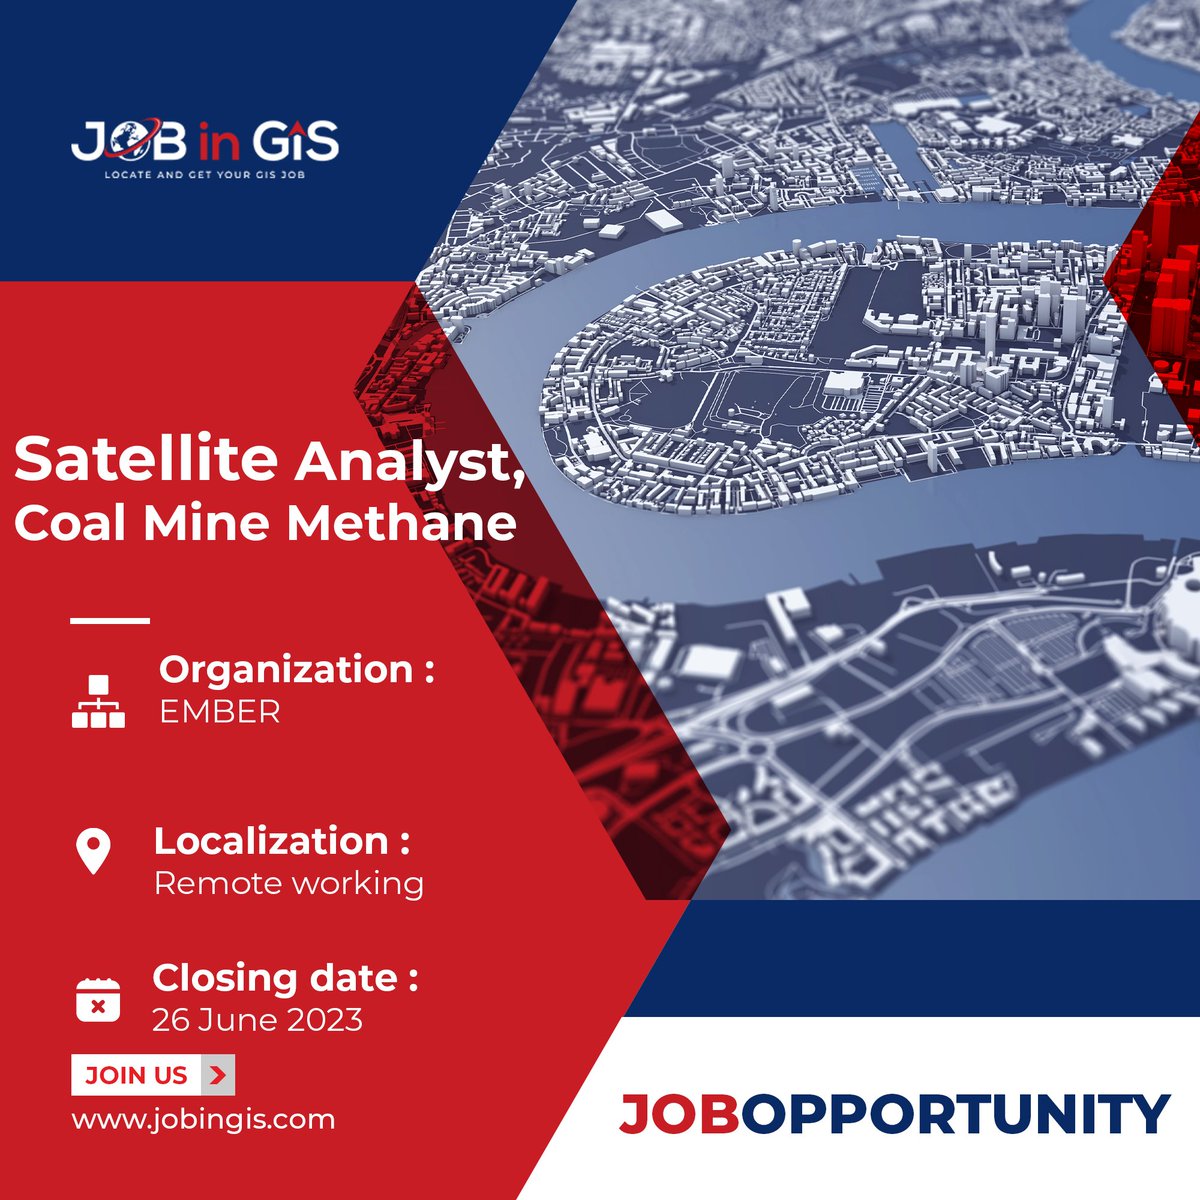 #jobingis : EMBER is hiring a Satellite Analyst, Coal Mine Methane
📍Location : #remoteworking 

Apply here 👉 : jobingis.com/jobs/satellite…

#Job #jobseekers #jobsearch #cartography #Geography #mapping #GIS #geospatial #remotesensing #gisjobs #gischat #remotework #remotejobs